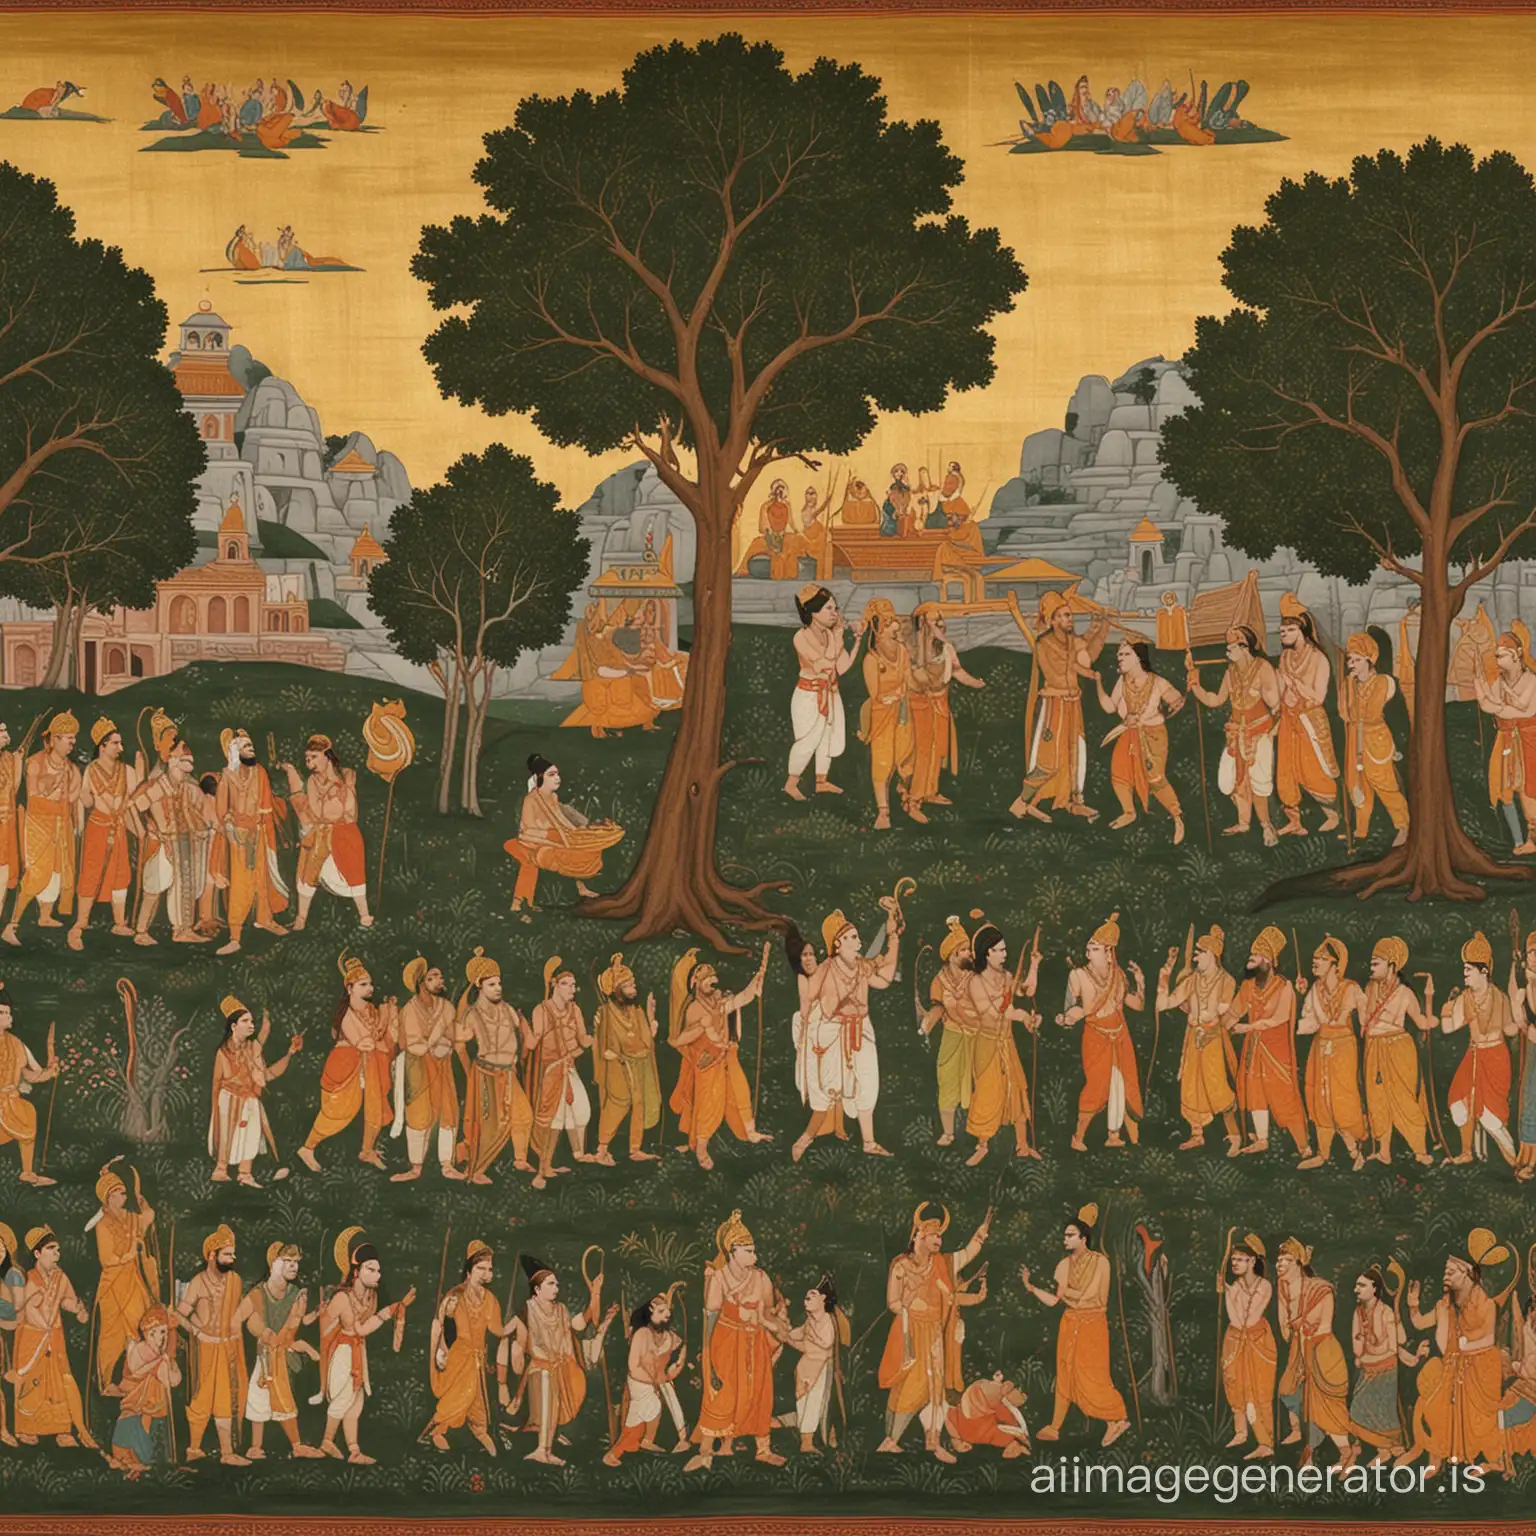 Mythical-Scenes-Depicting-the-Raghukul-Dynasty-of-Lord-Rama